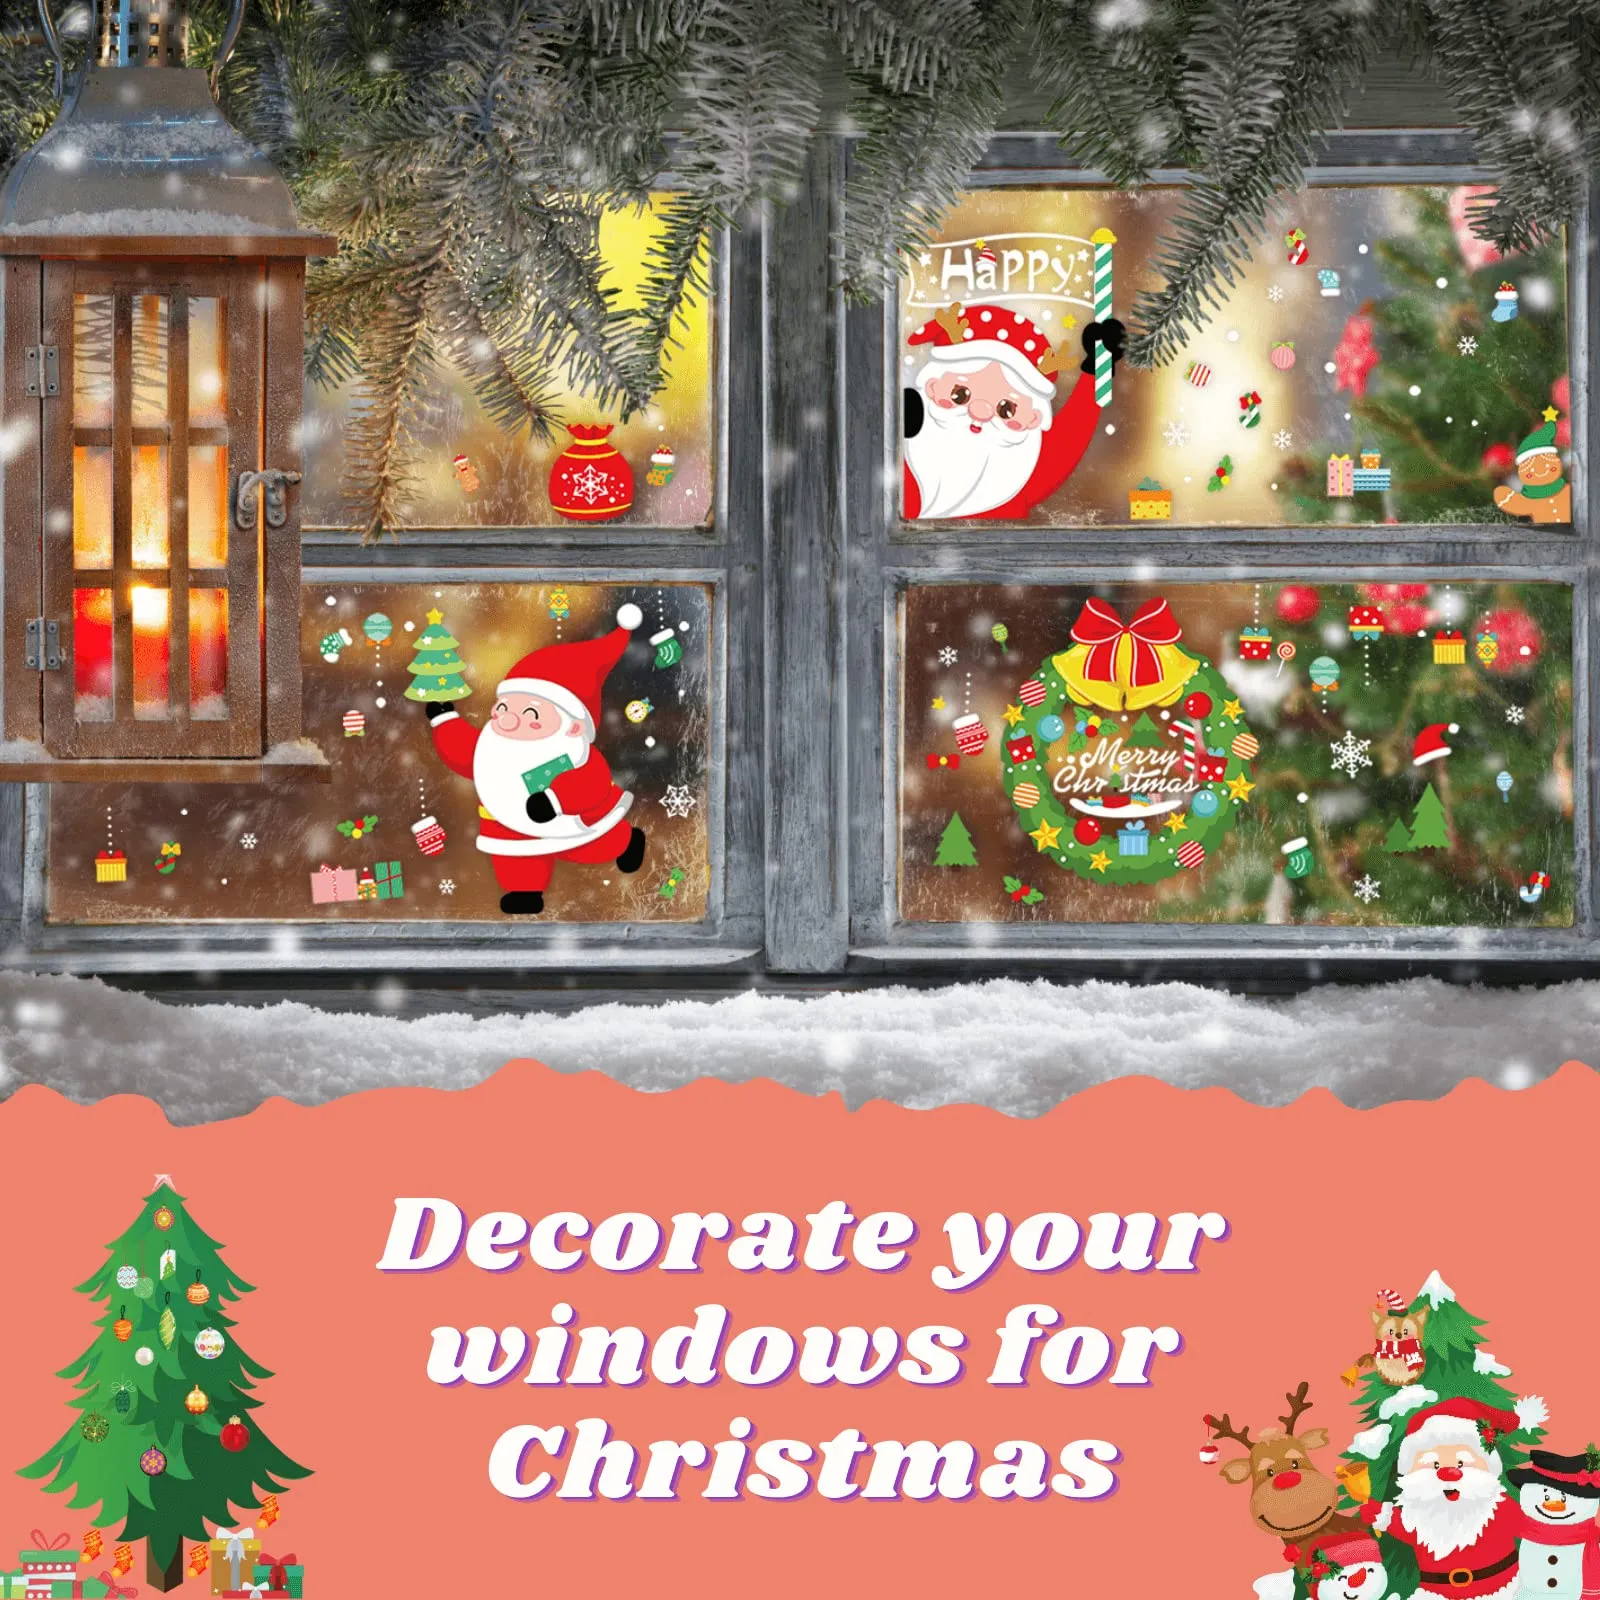 3ml christmas windows decoration stickers 9 sheets snowman reindeer snowflake window clings xmas party supplies for offices homes and schools christmas window decals christmas